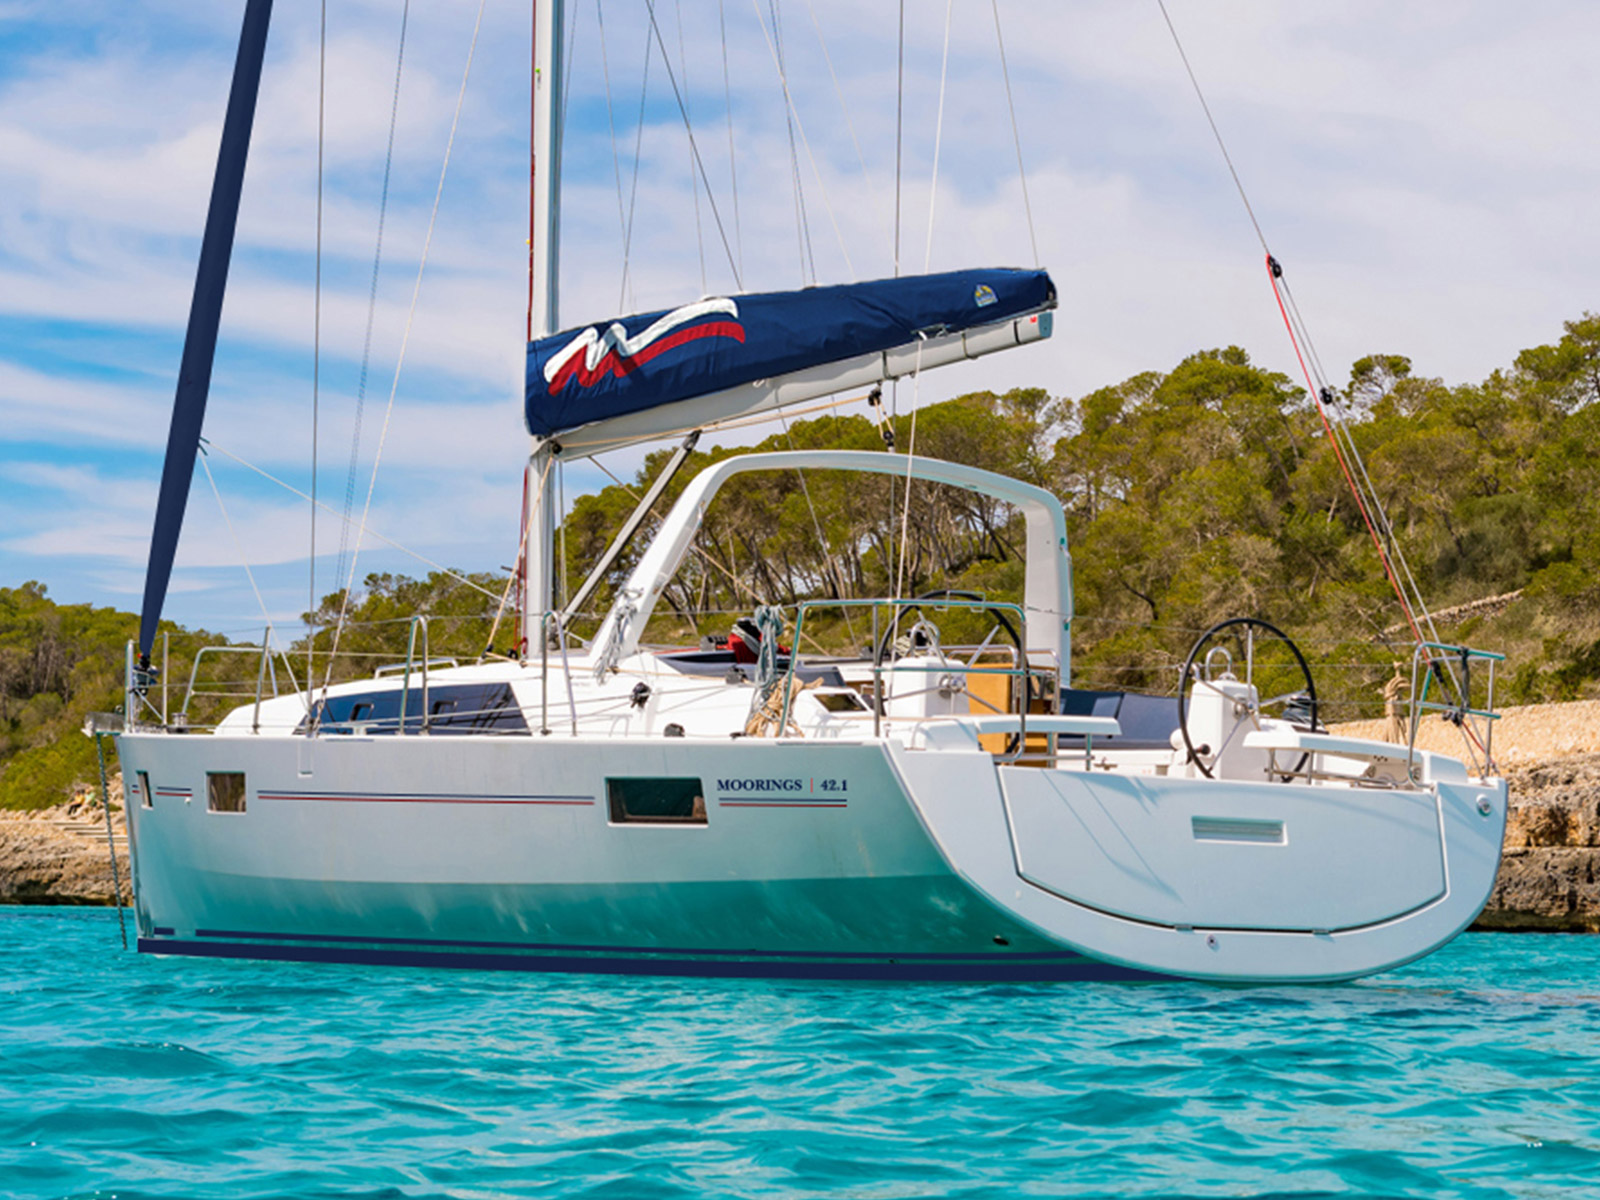 Oceanis 42 - Yacht Charter Marsh Harbour & Boat hire in Bahamas Abaco Islands Marsh Harbour TradeWinds Yacht Club 1